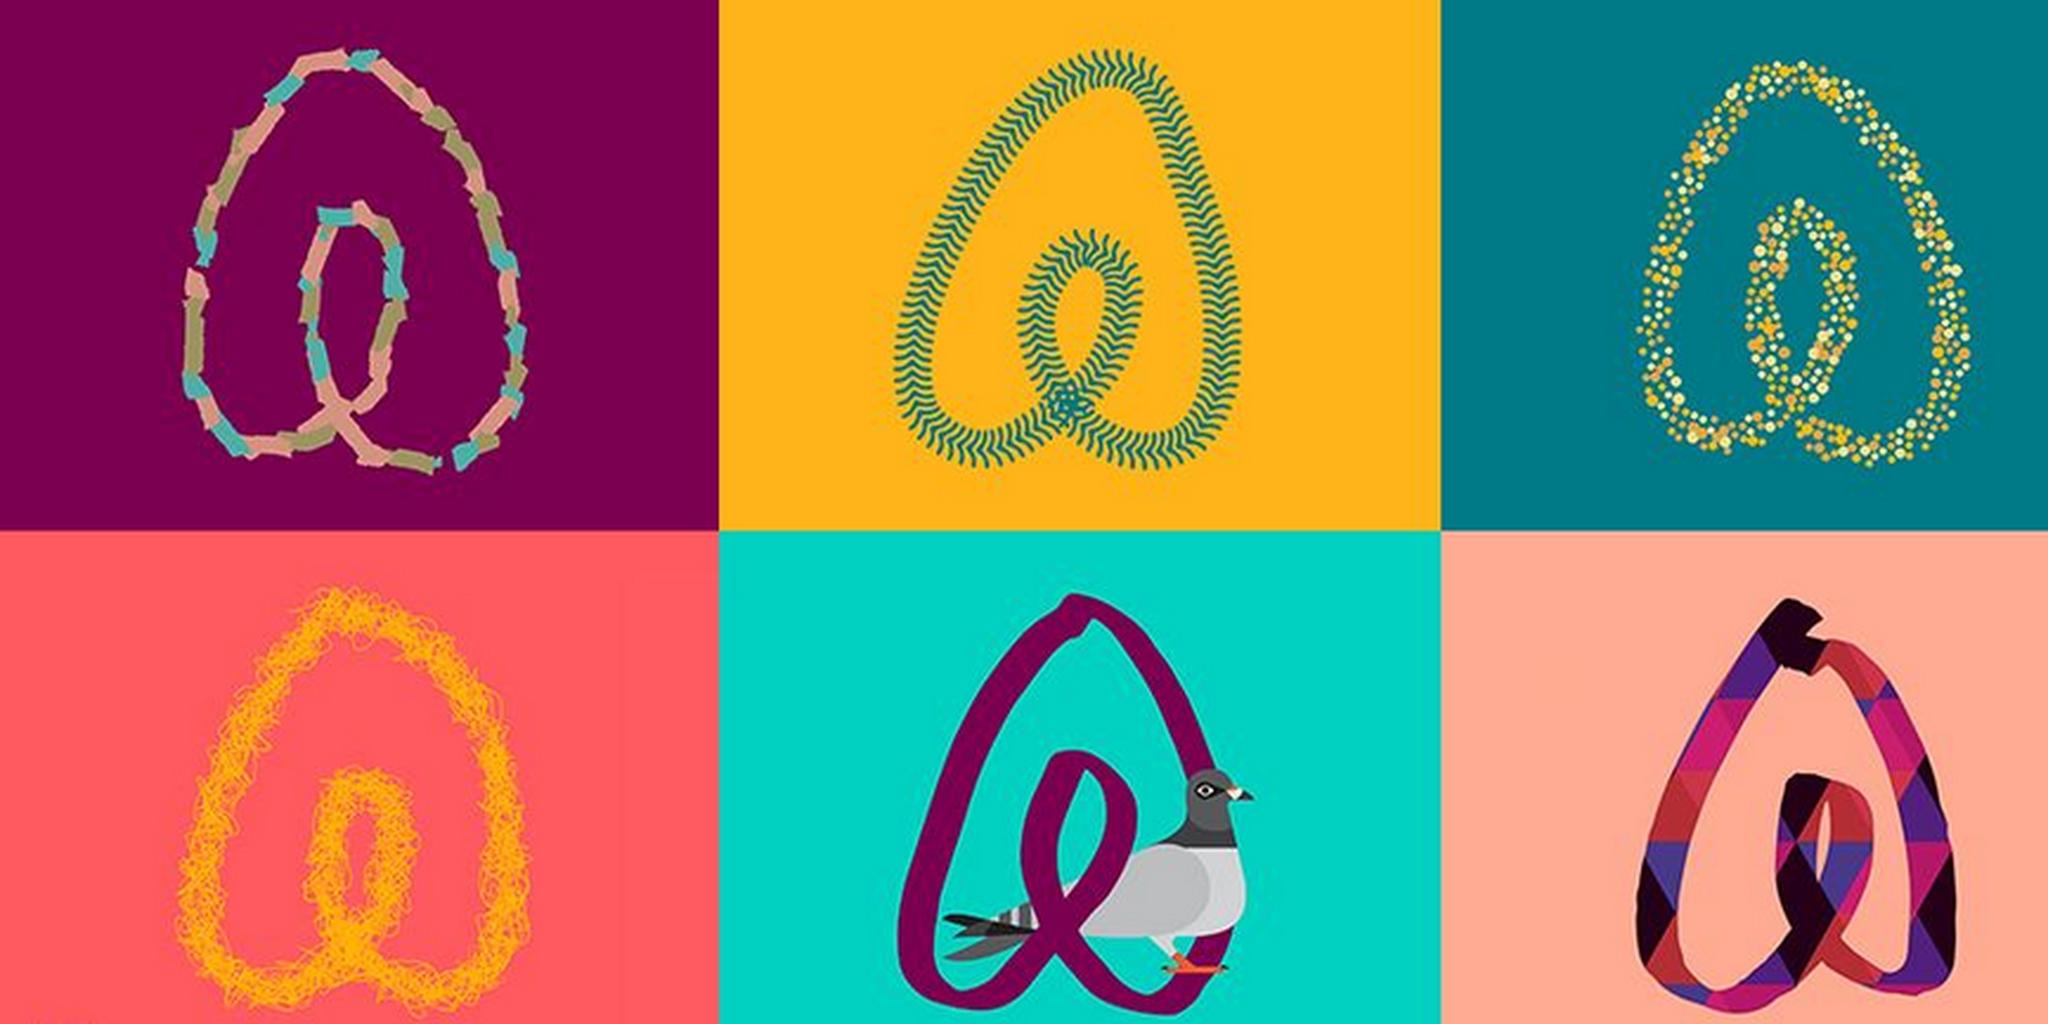 Airbnb New Logo - There's a Tumblr devoted to remixing Airbnb's sexy new logo